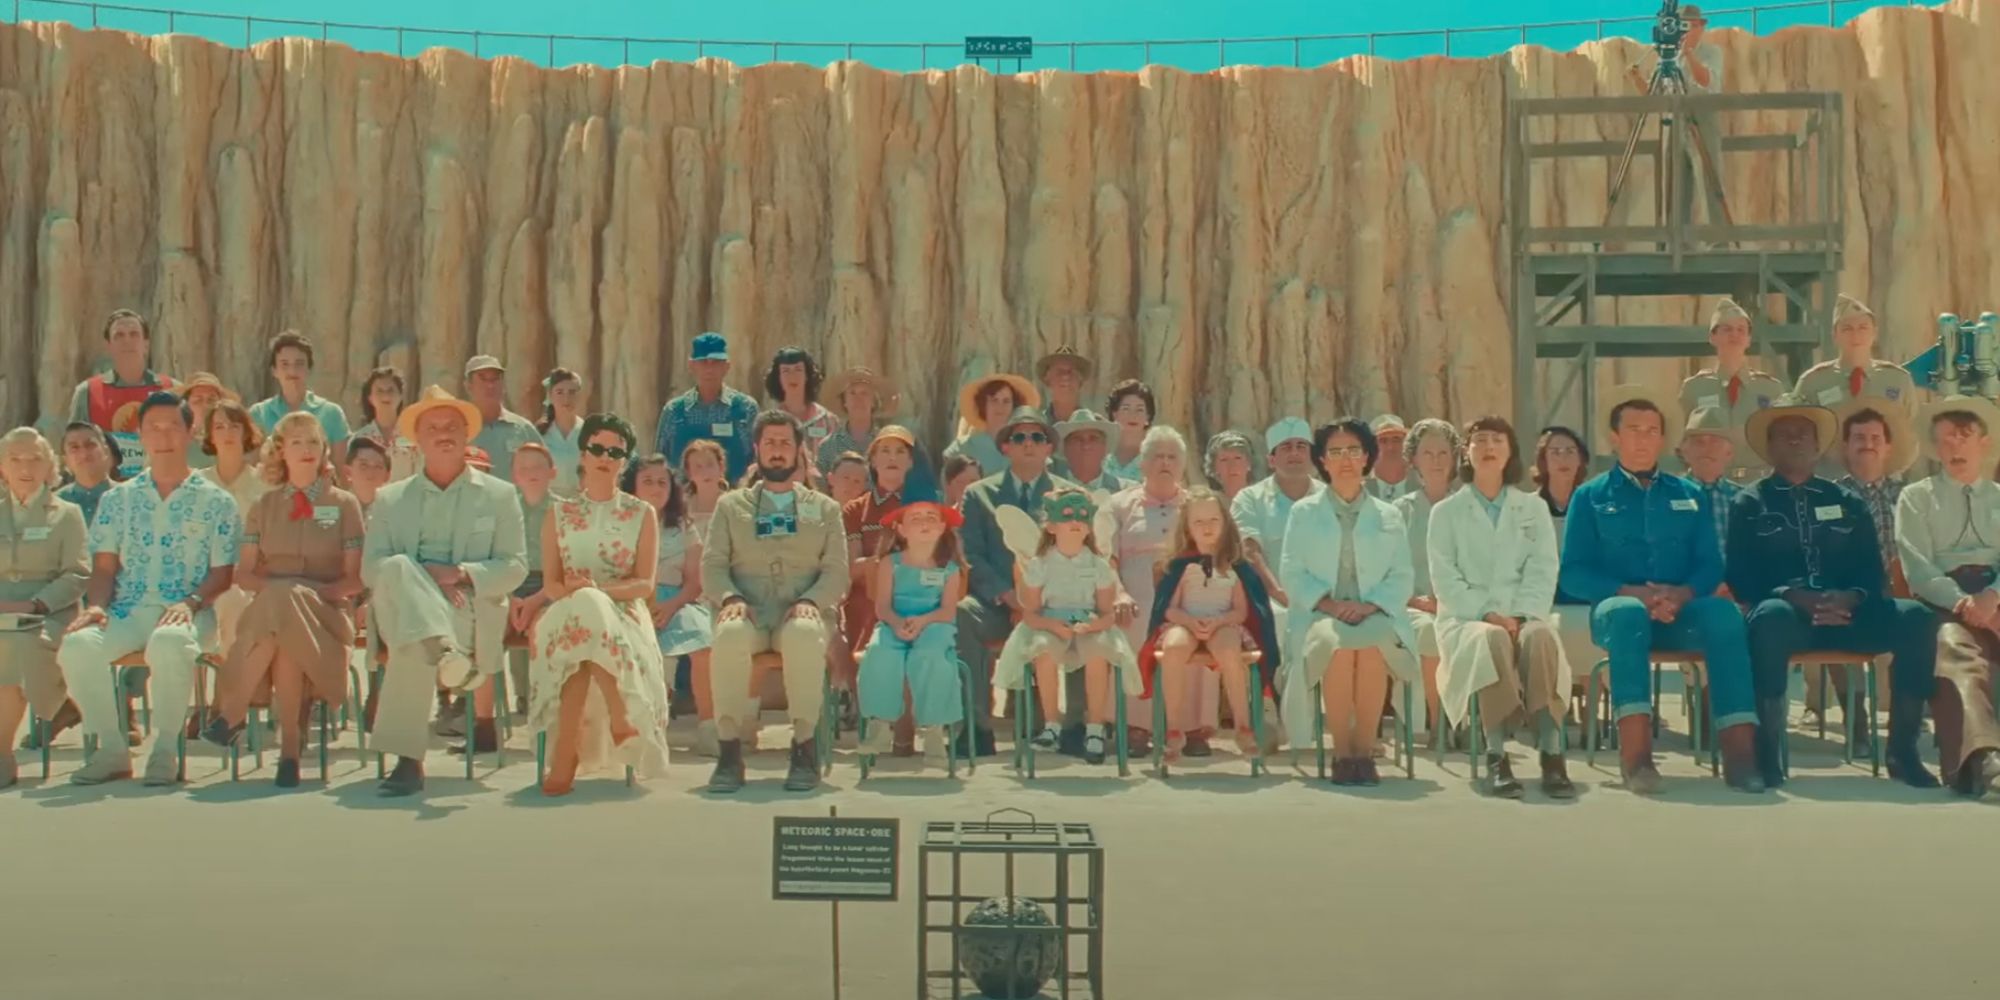 A group shot of the cast of Wes Anderson's Asteroid City.